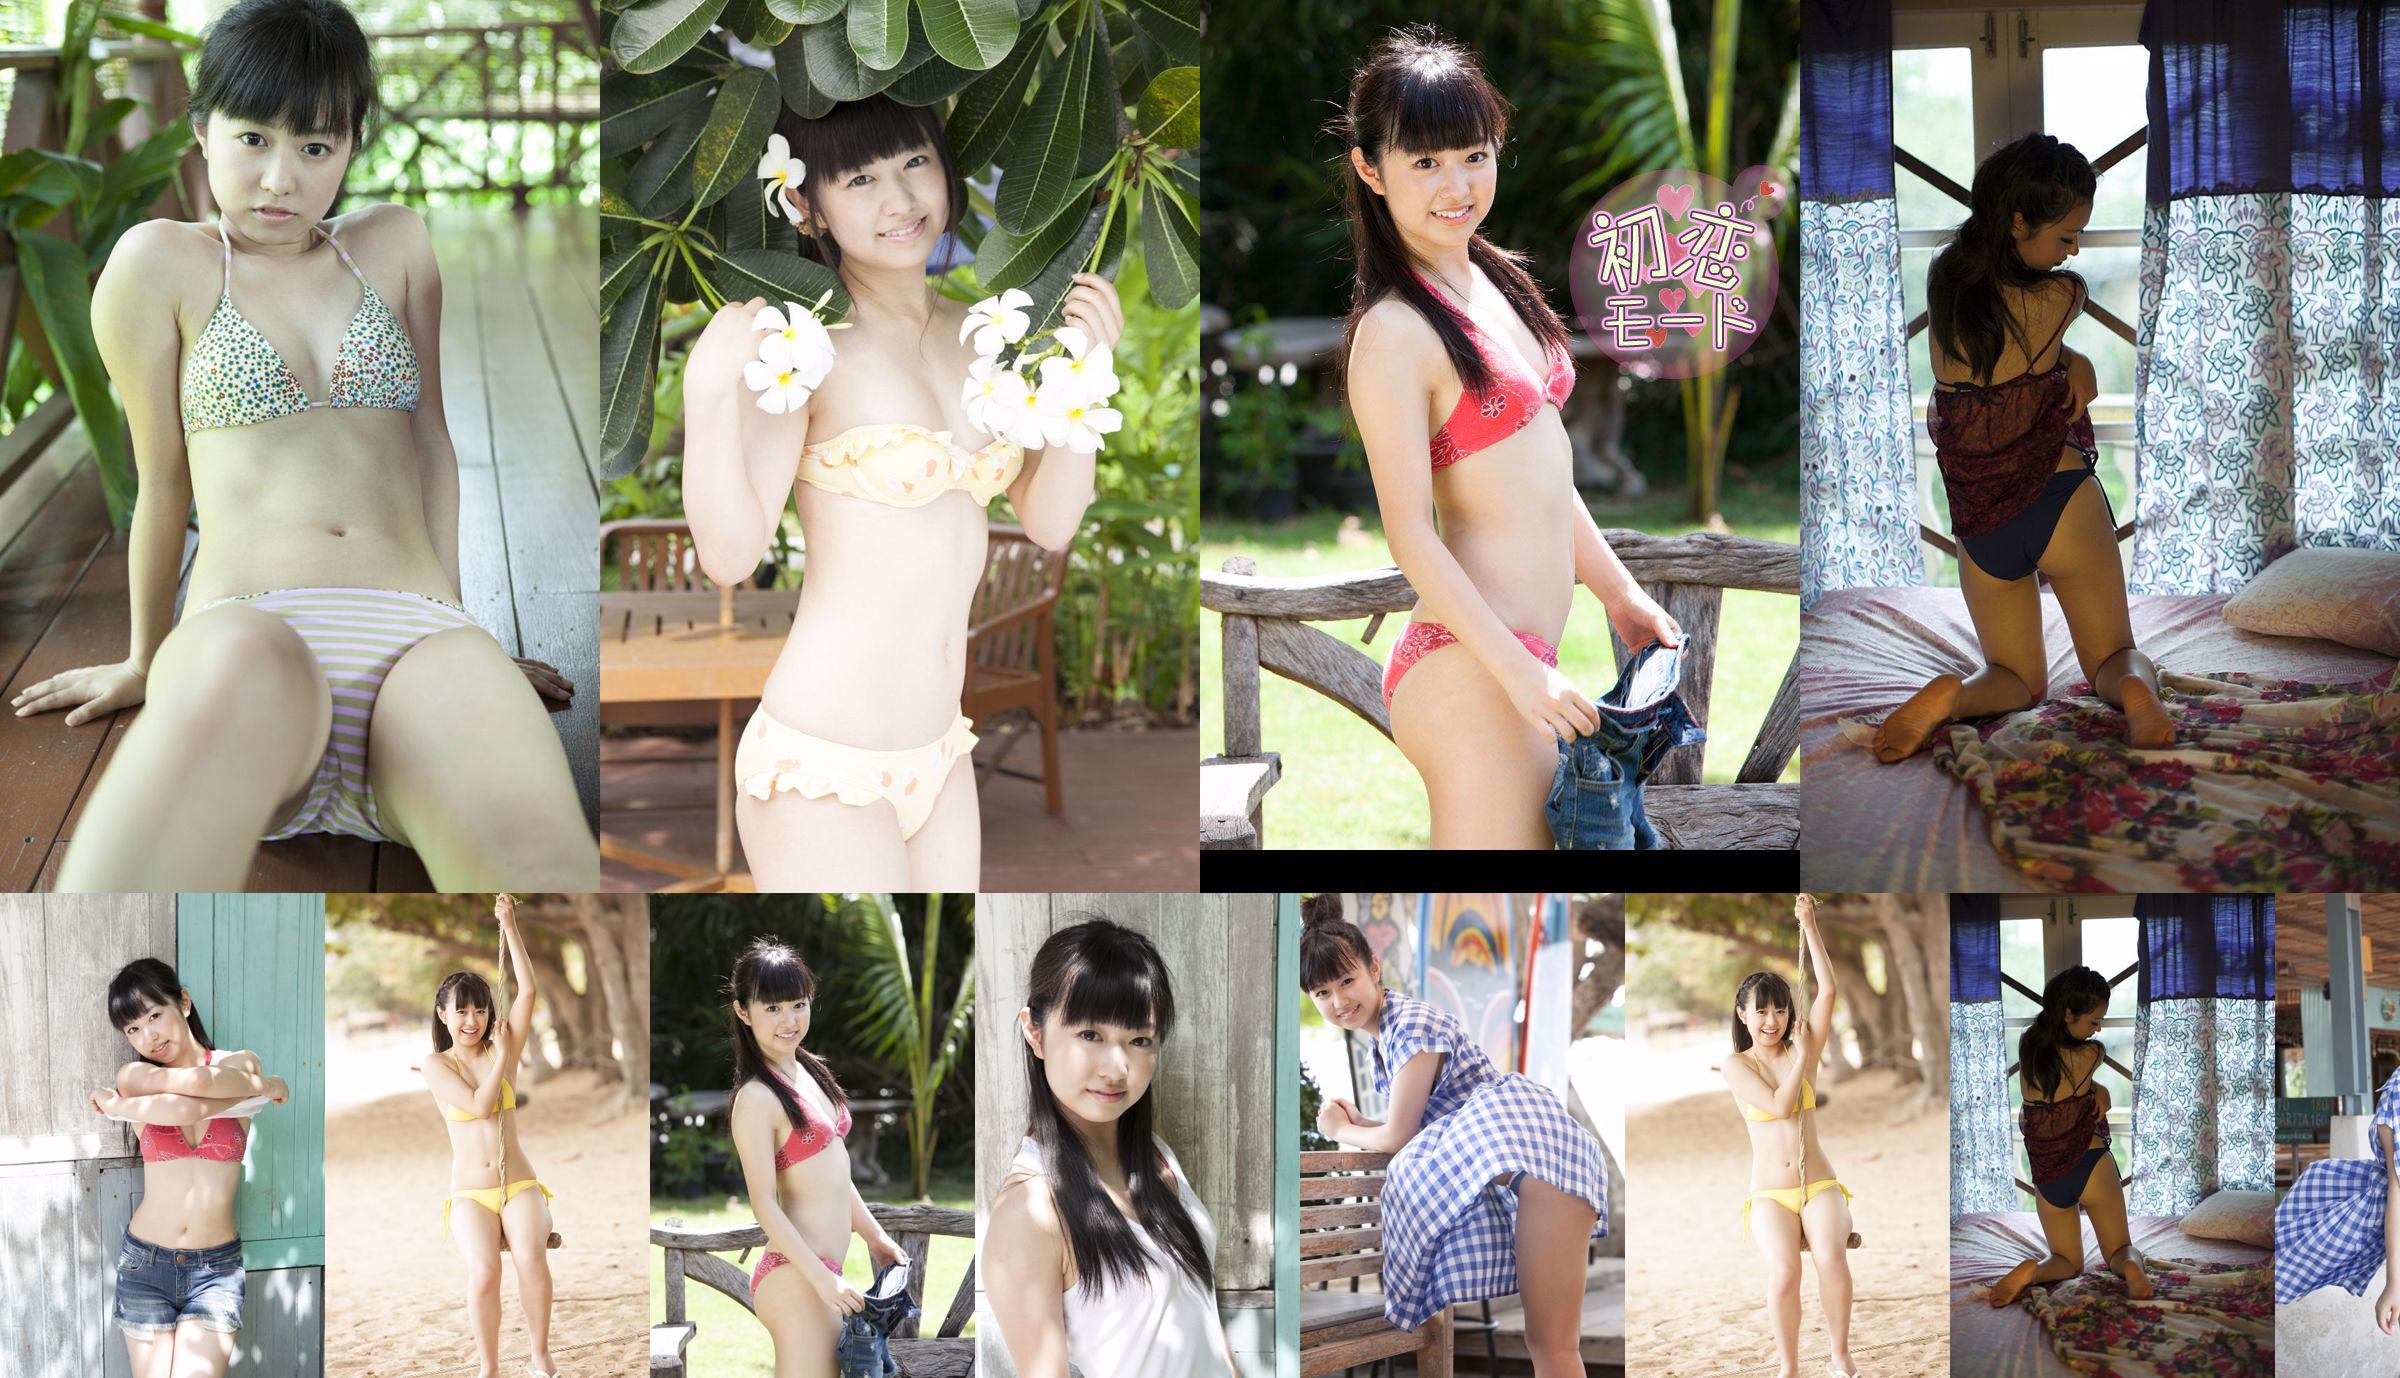 Ikura Aimi "First Love Mode" Partie 1 [Image.tv] No.27076d Page 13